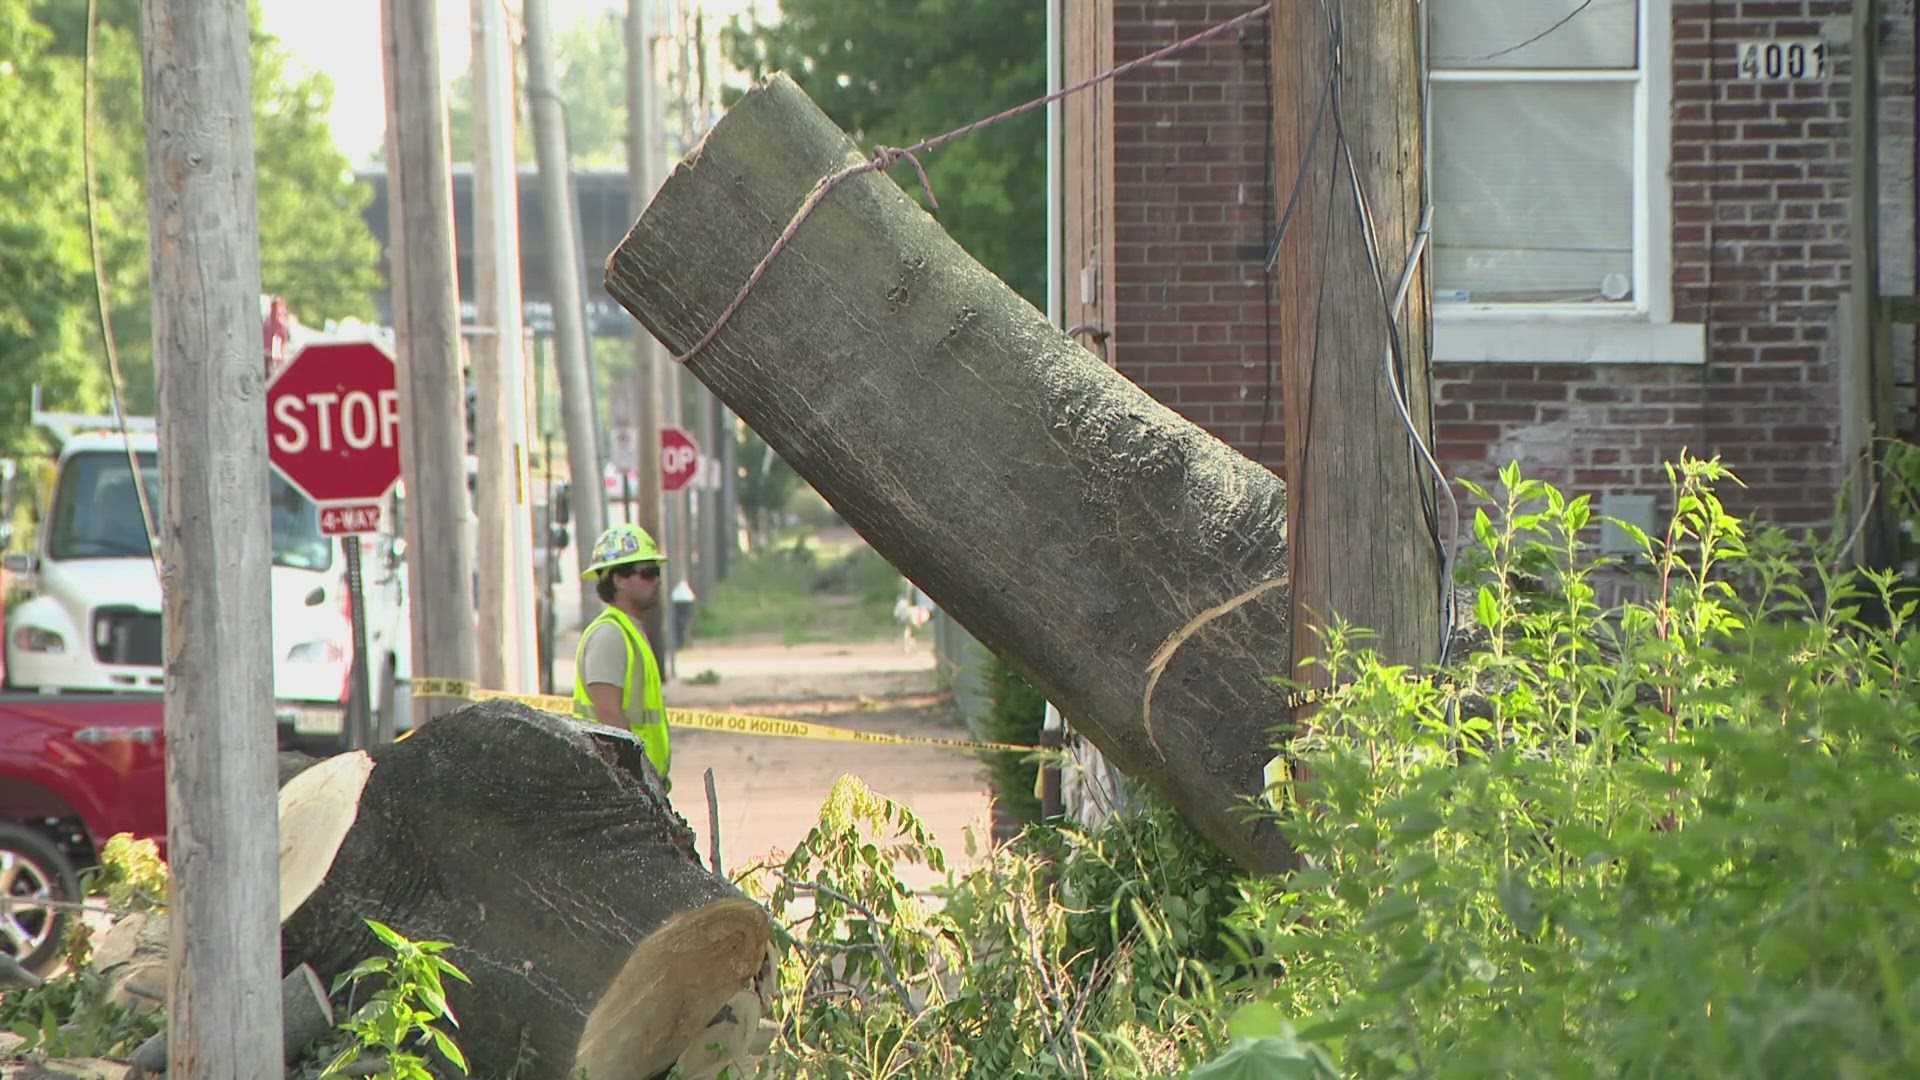 Ameren Missouri officials said they are anticipating power to be fully restored by Wednesday night. Many customers are still waiting for the lights to turn back on.